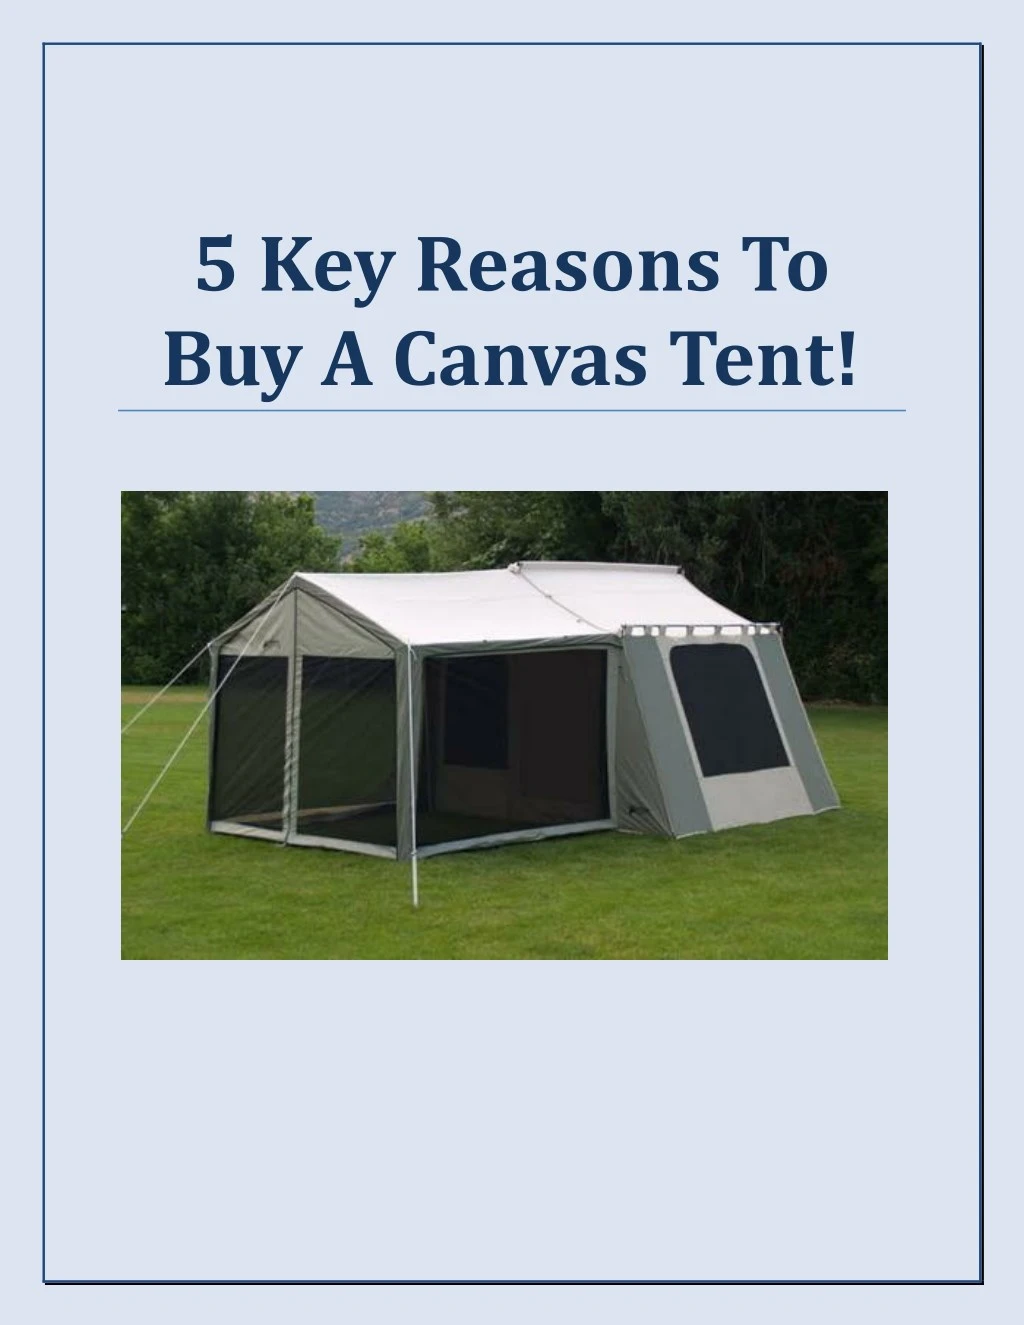 5 key reasons to buy a canvas tent